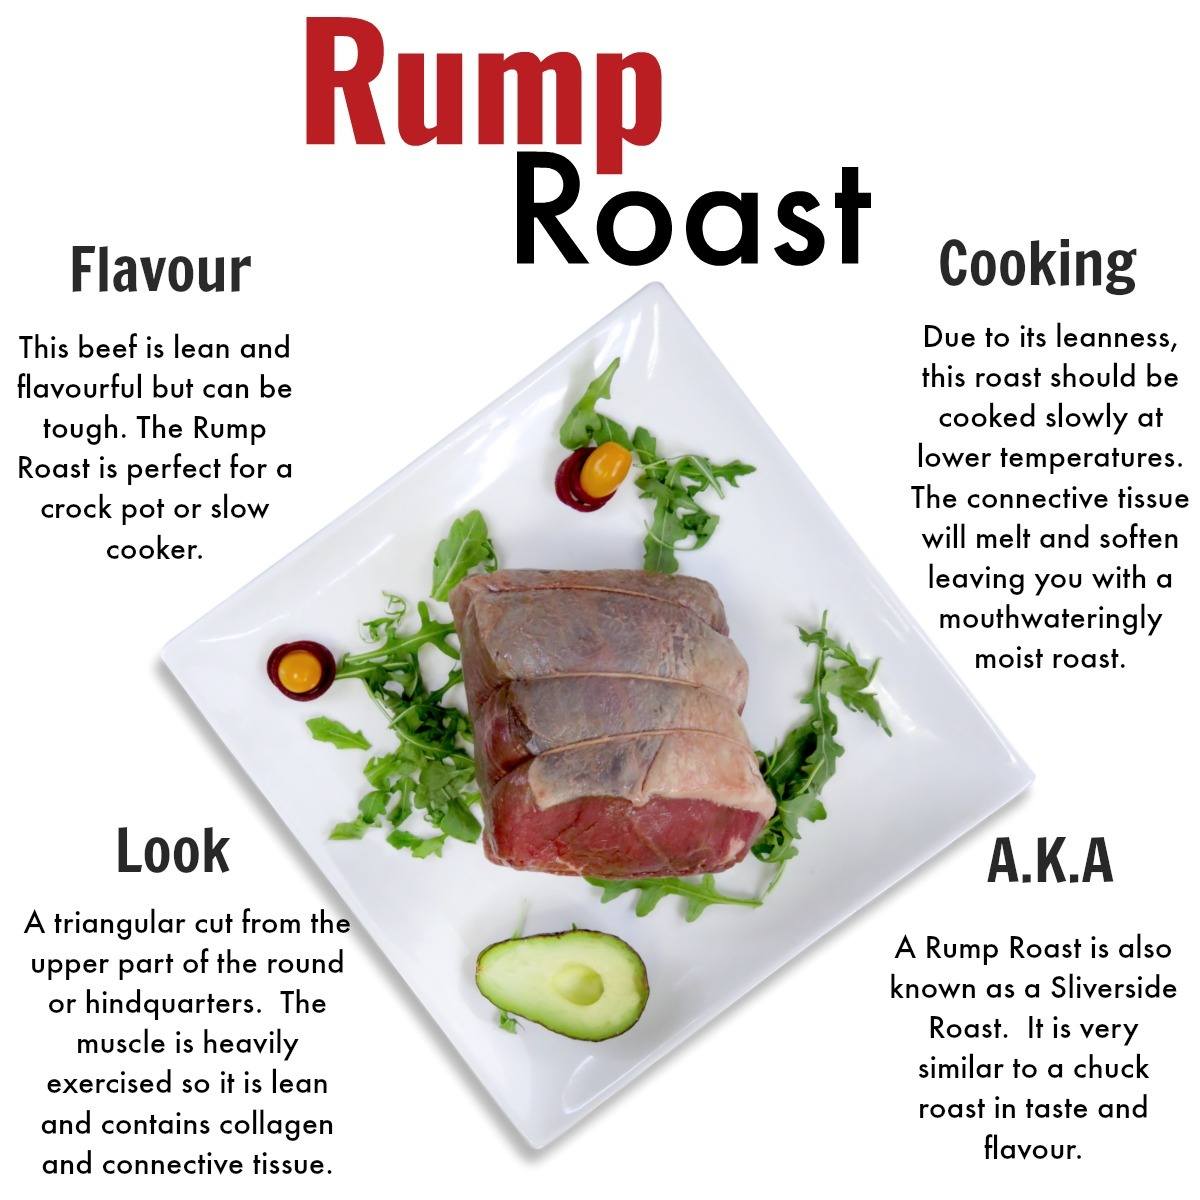 Affordable grass-fed beef delivery near me, steaks, ground beef and more - Rump Roast 2